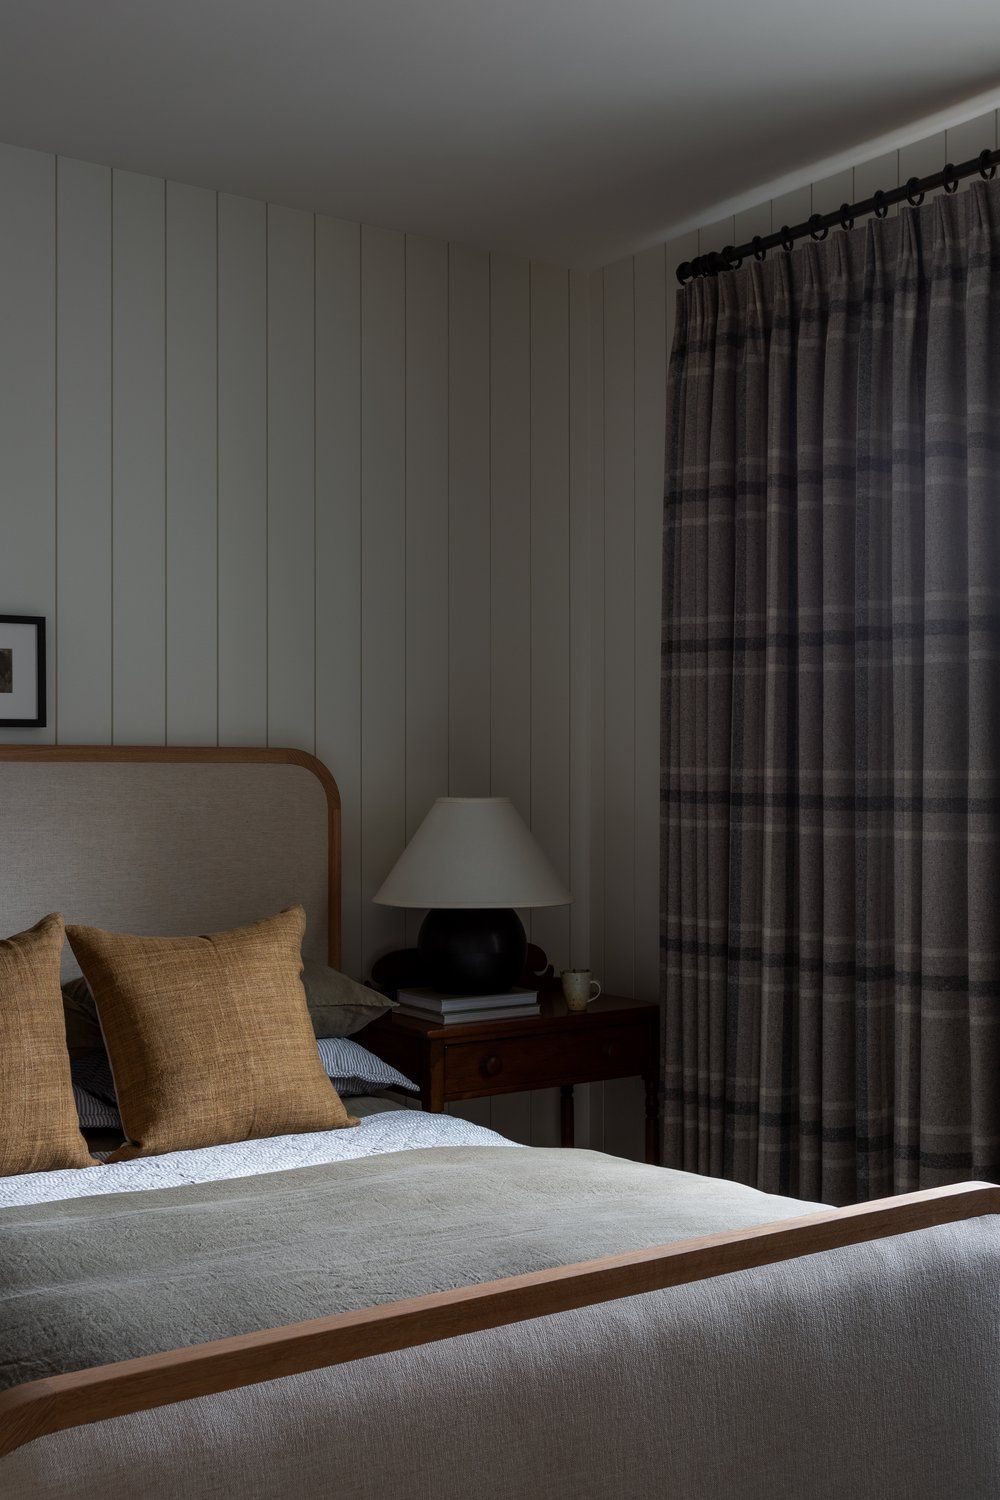 The Timeless Appeal of Plaid Curtains in
Interior Design